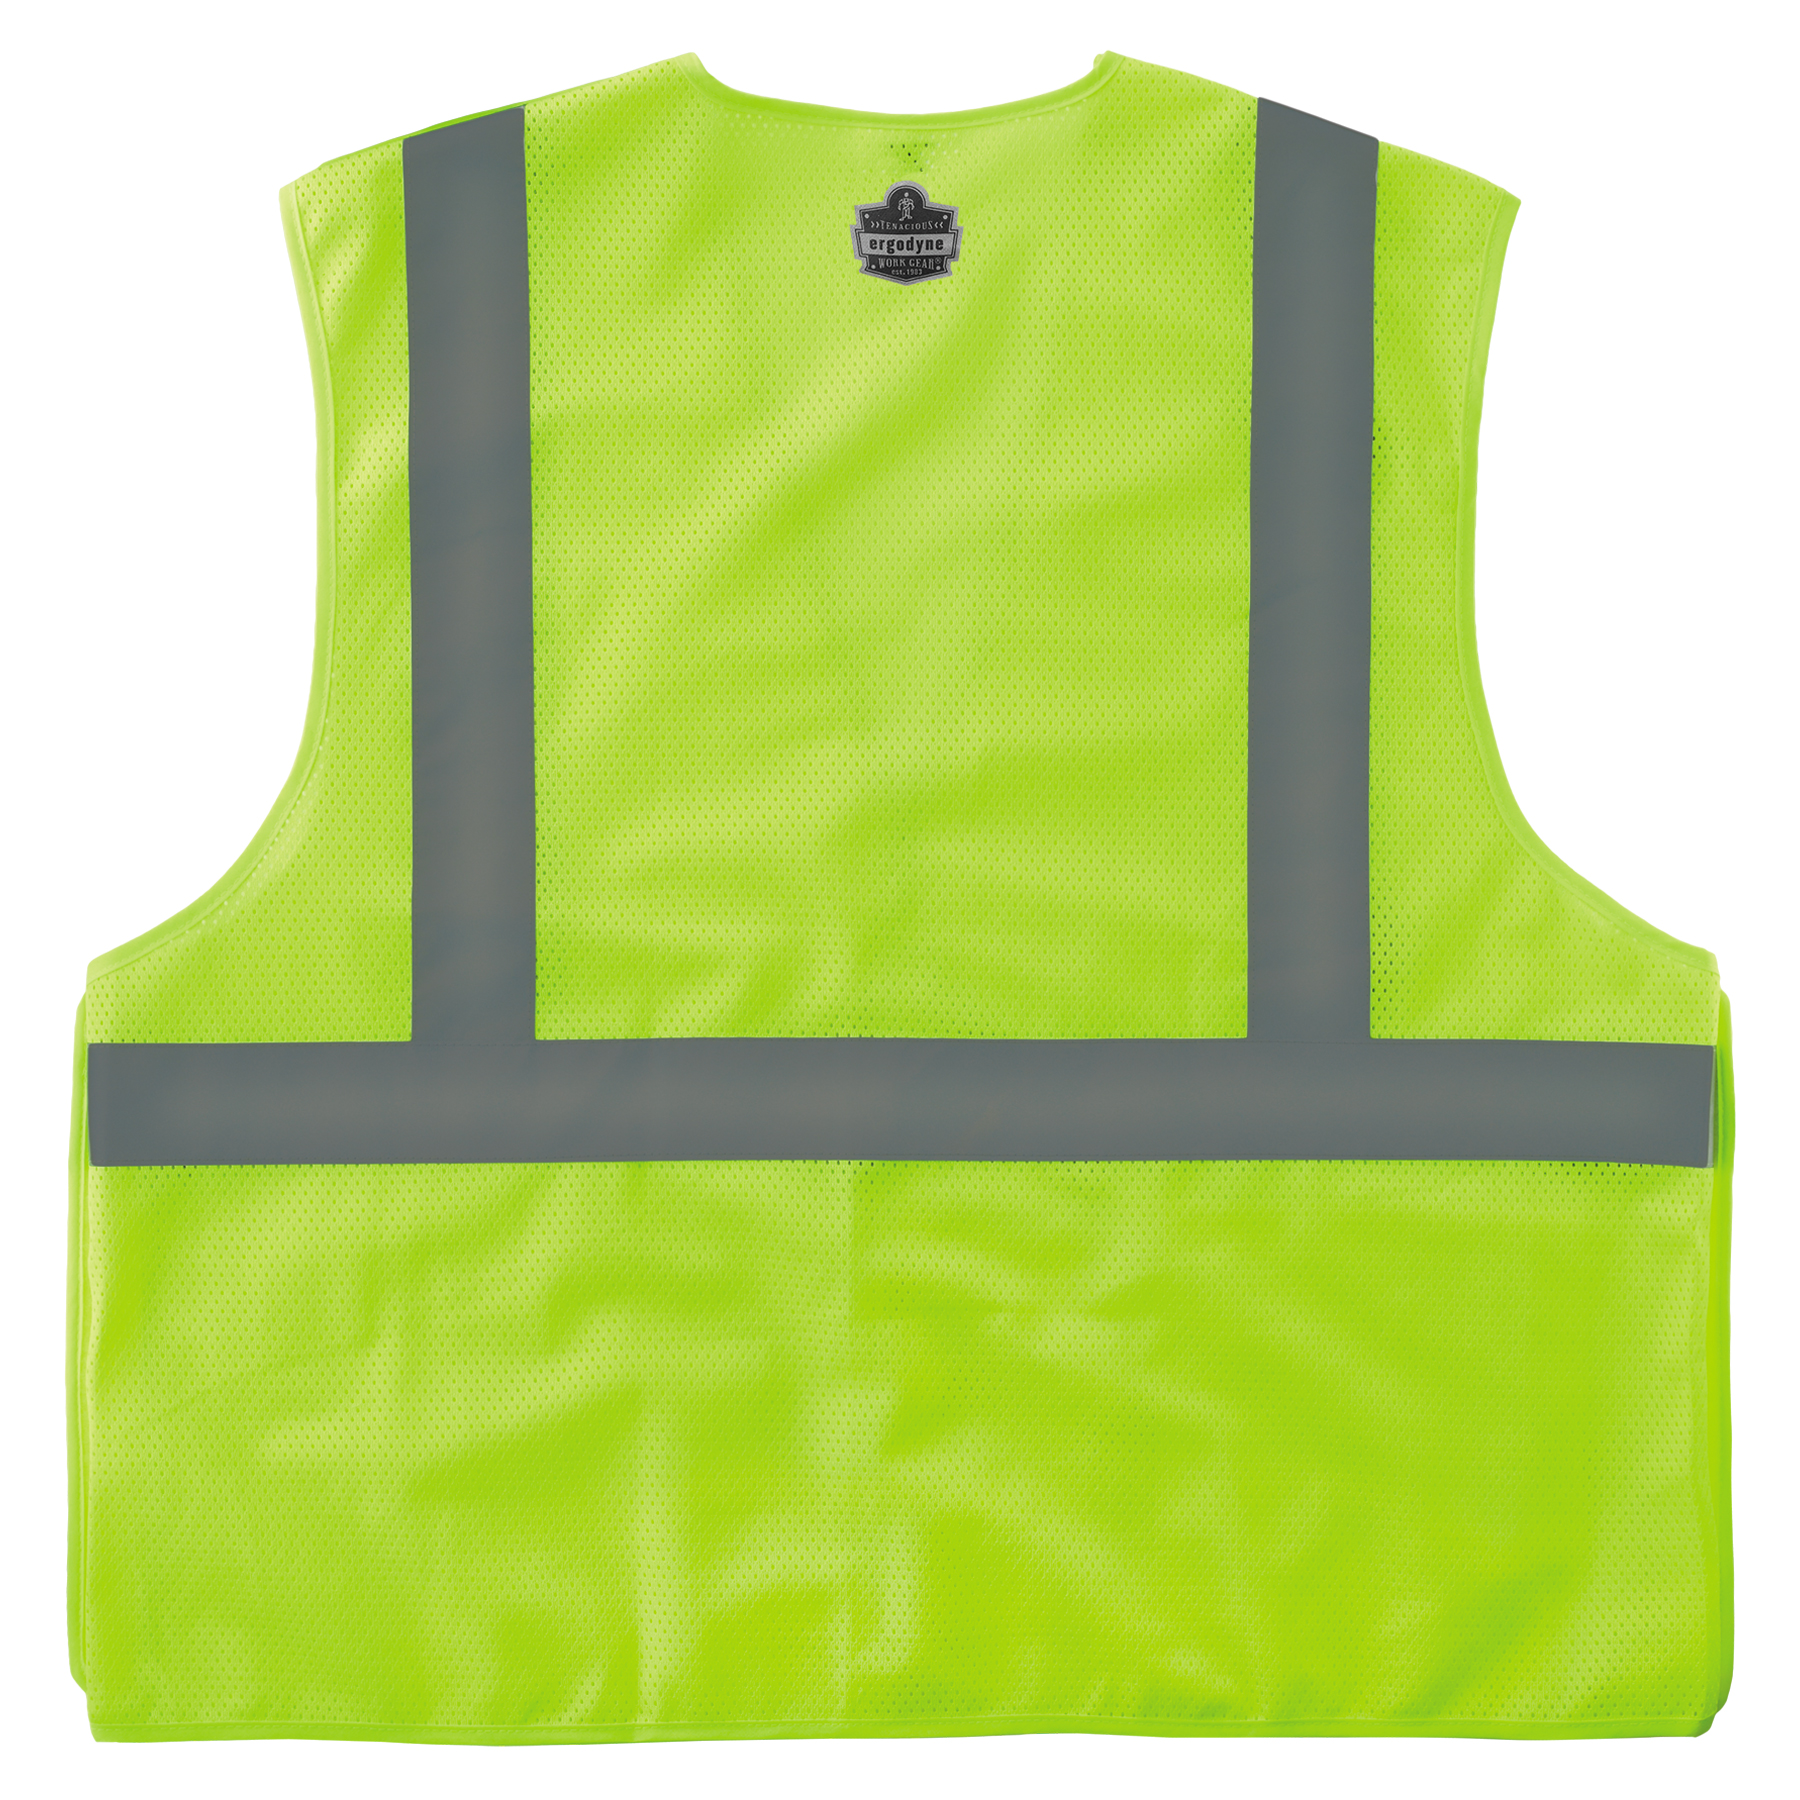 MAXSA Innovations 20026 Yellow Large Reflective Safety Vest with 16 LED Lights 